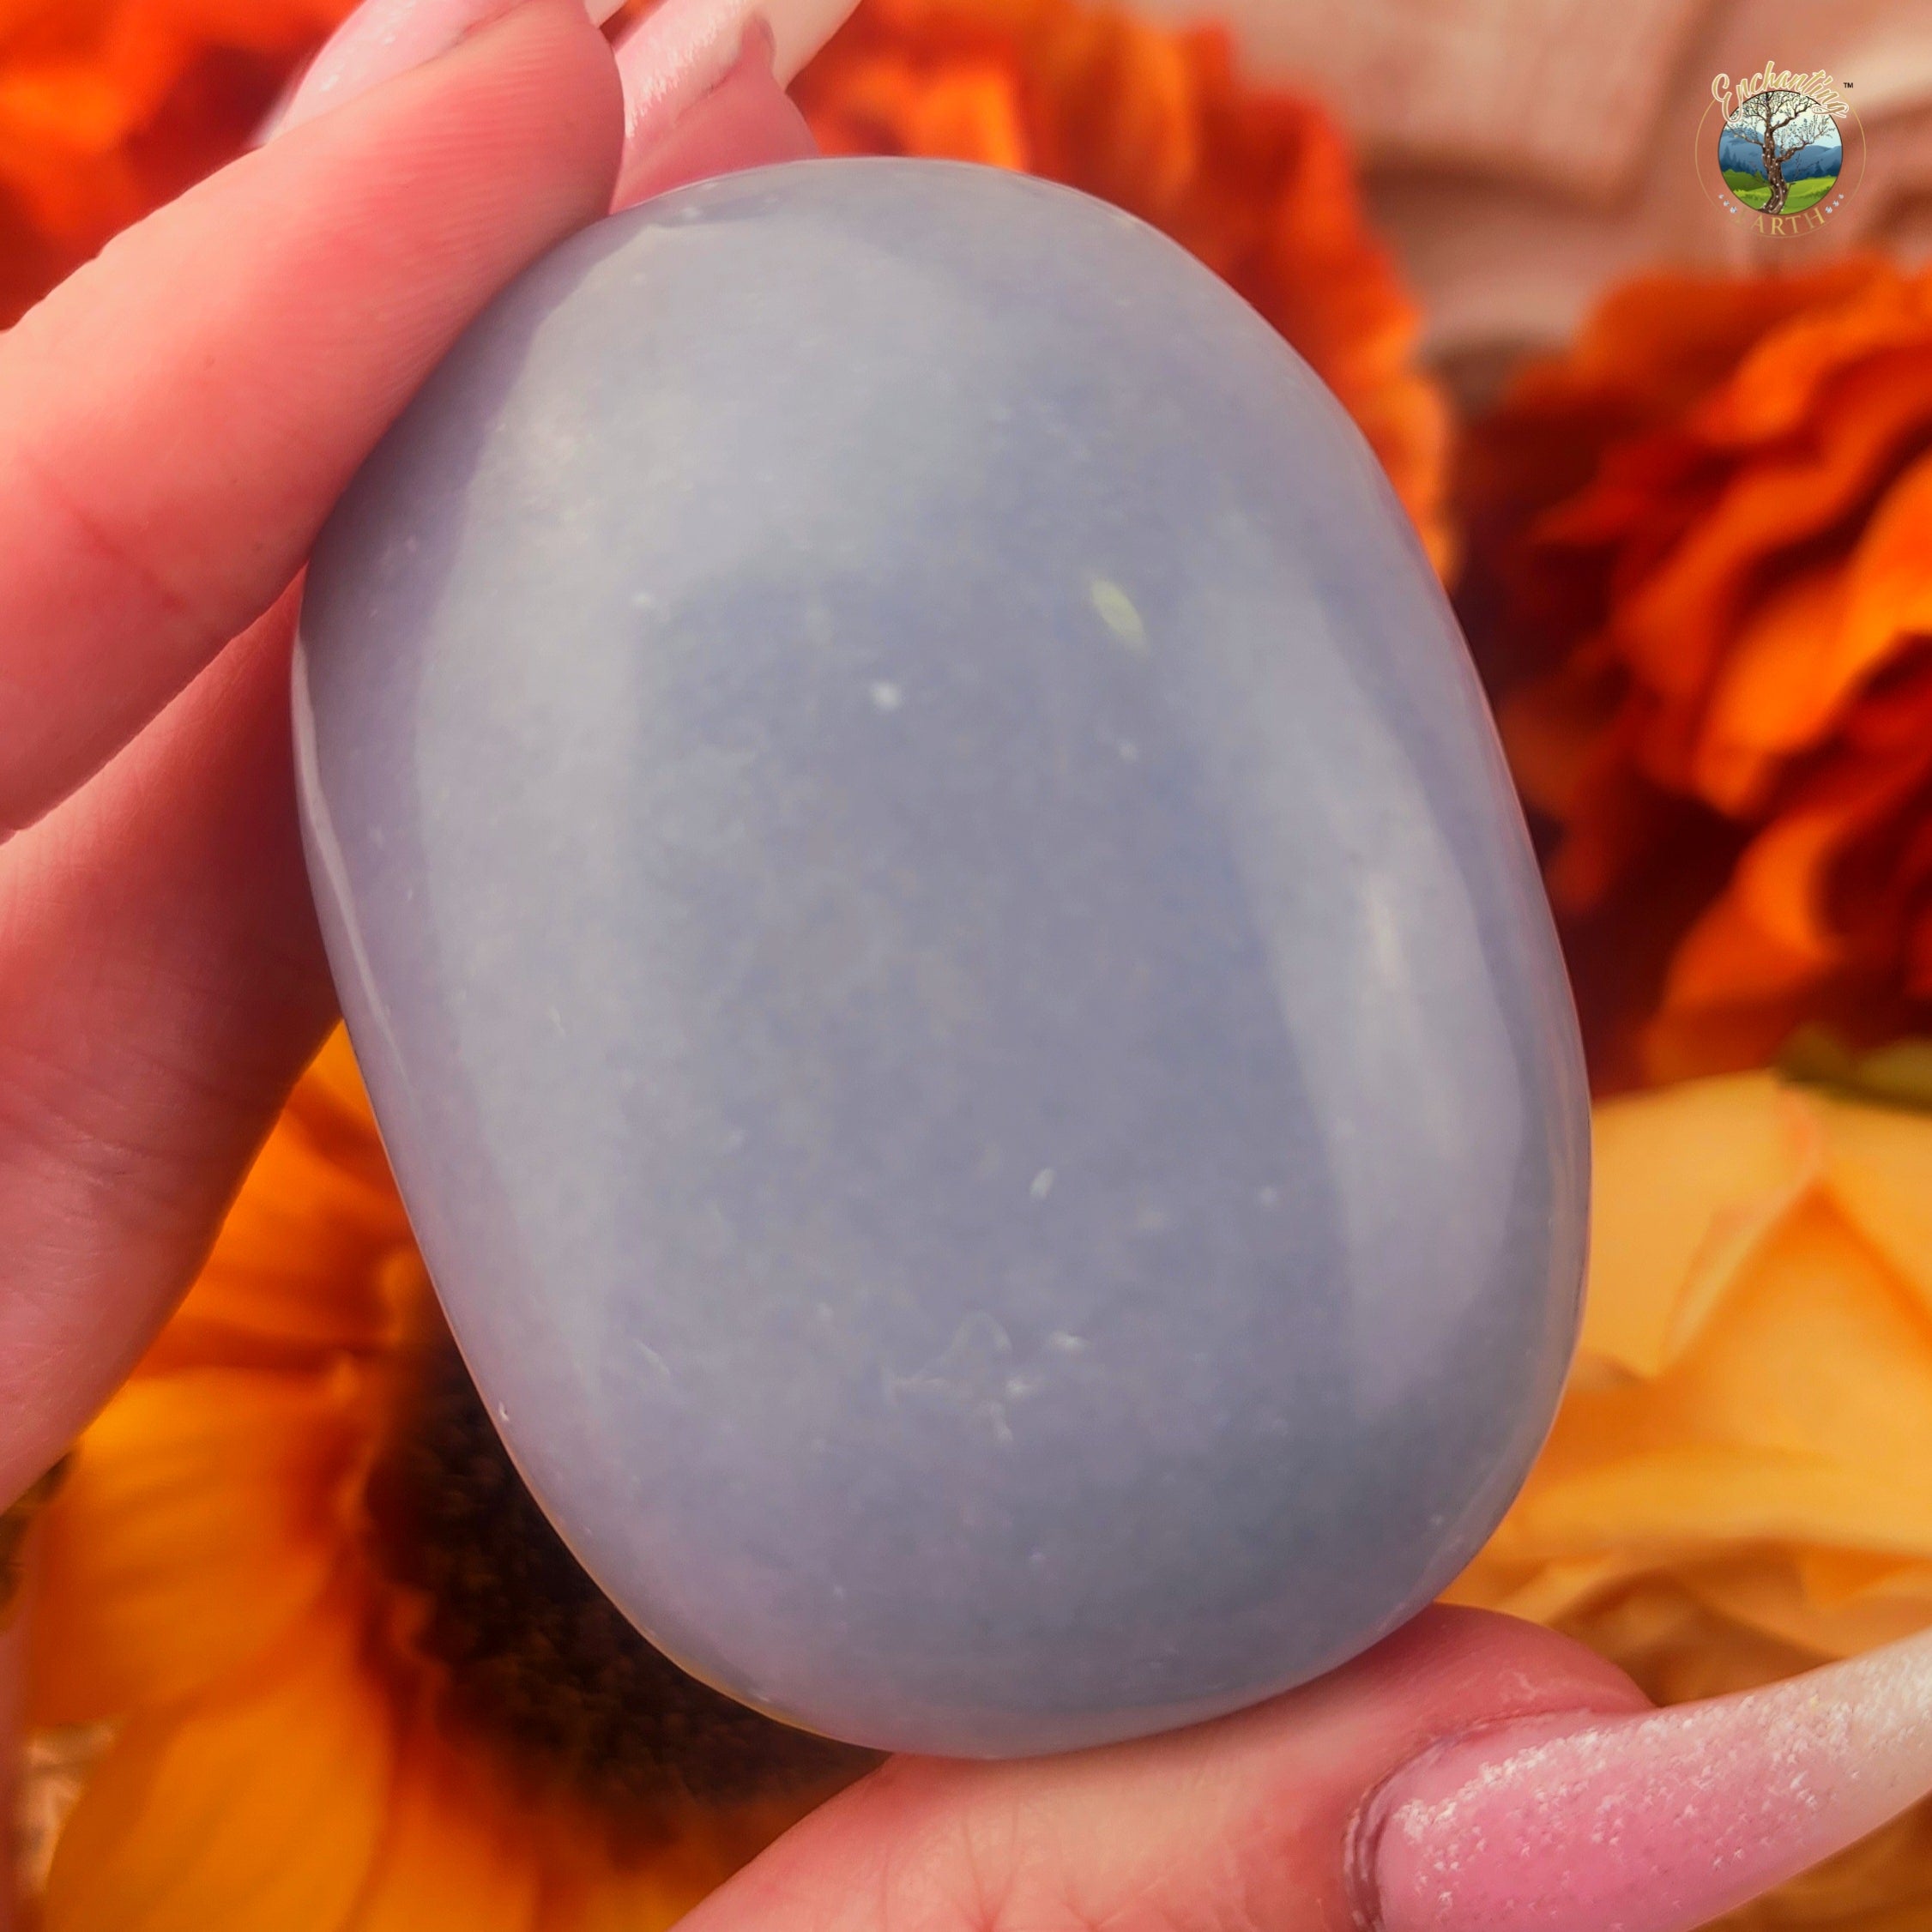 Angelite Palm Stone for Communication and Connection with Angels